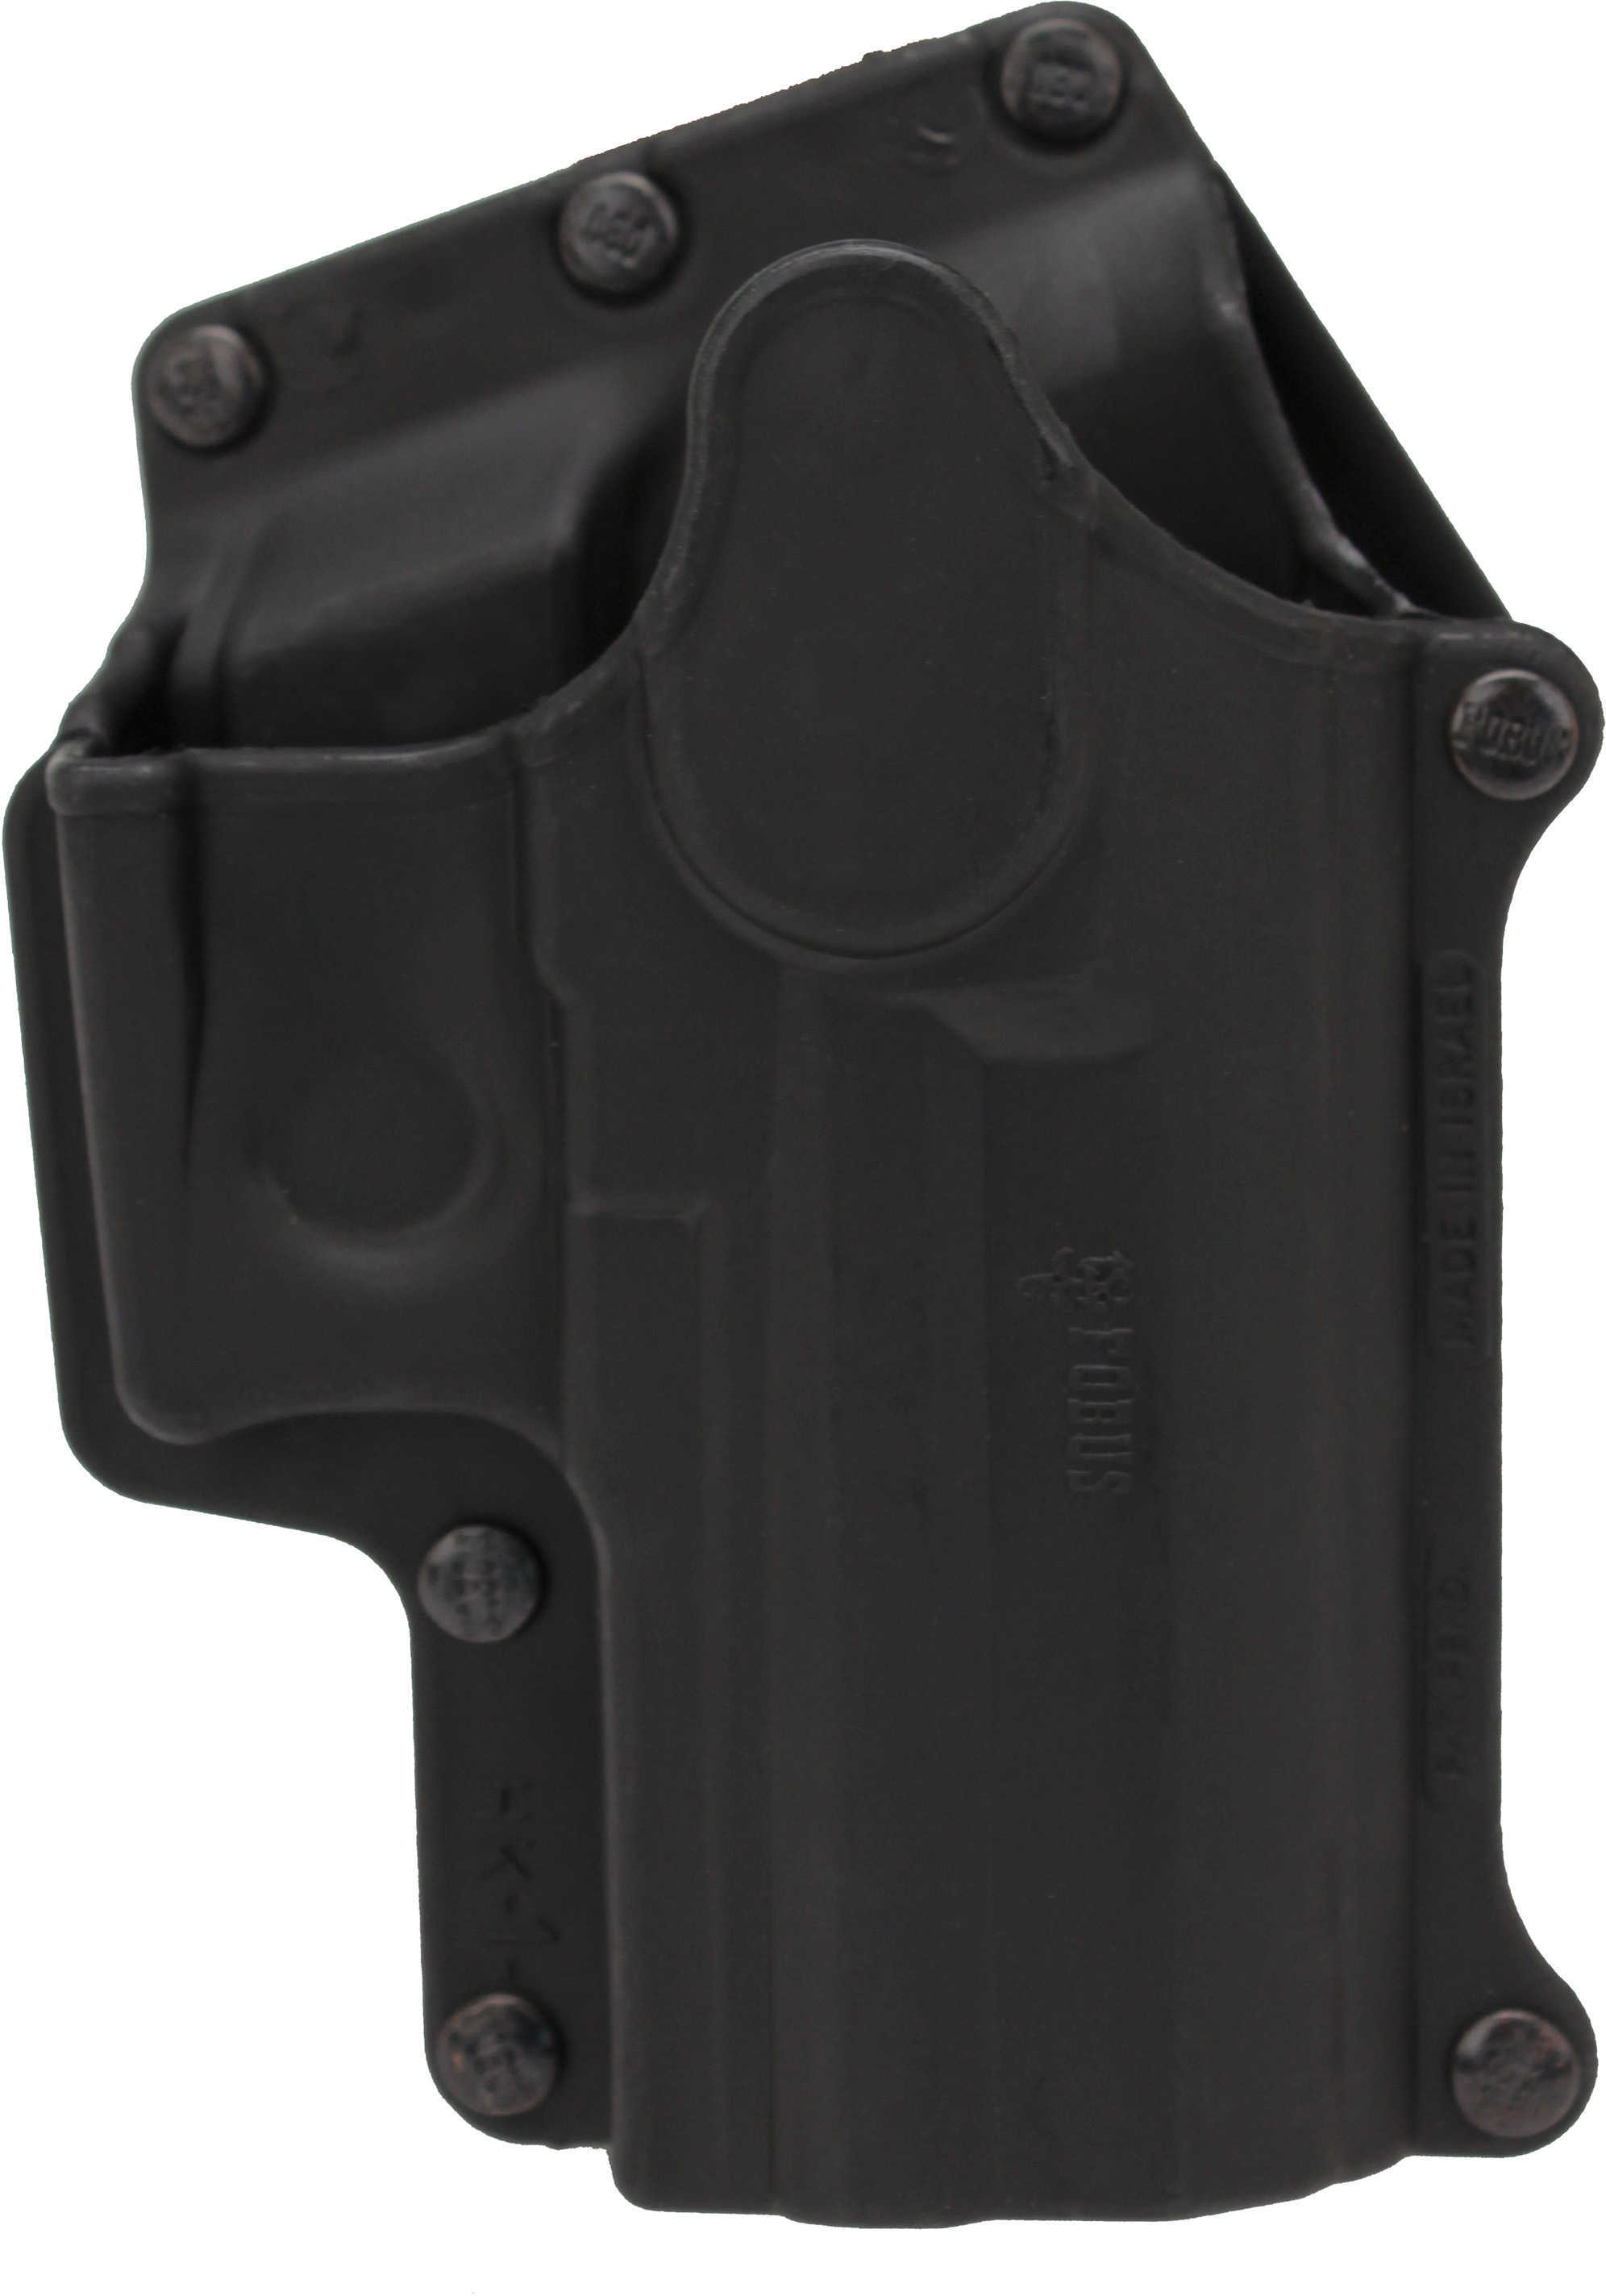 Fobus Low Profile High Ride Standard Holster With Belt Attachment Md: HK1BH